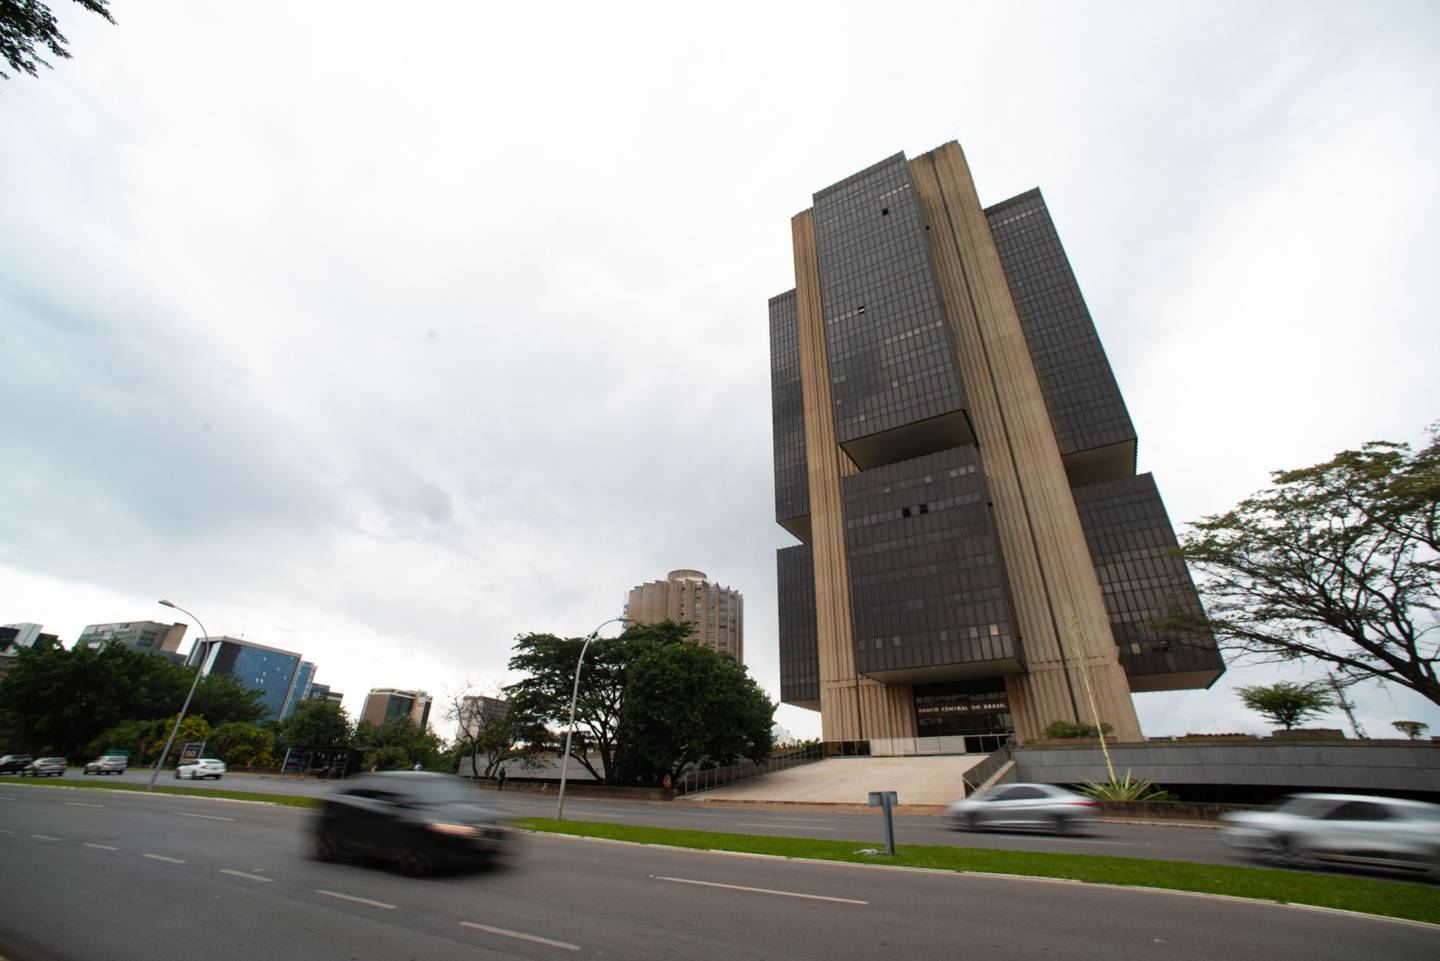 The Central Bank of Brazil is among the most hawkish global central banks, having raised rates by 975 basis points over the past year. Bloomberg